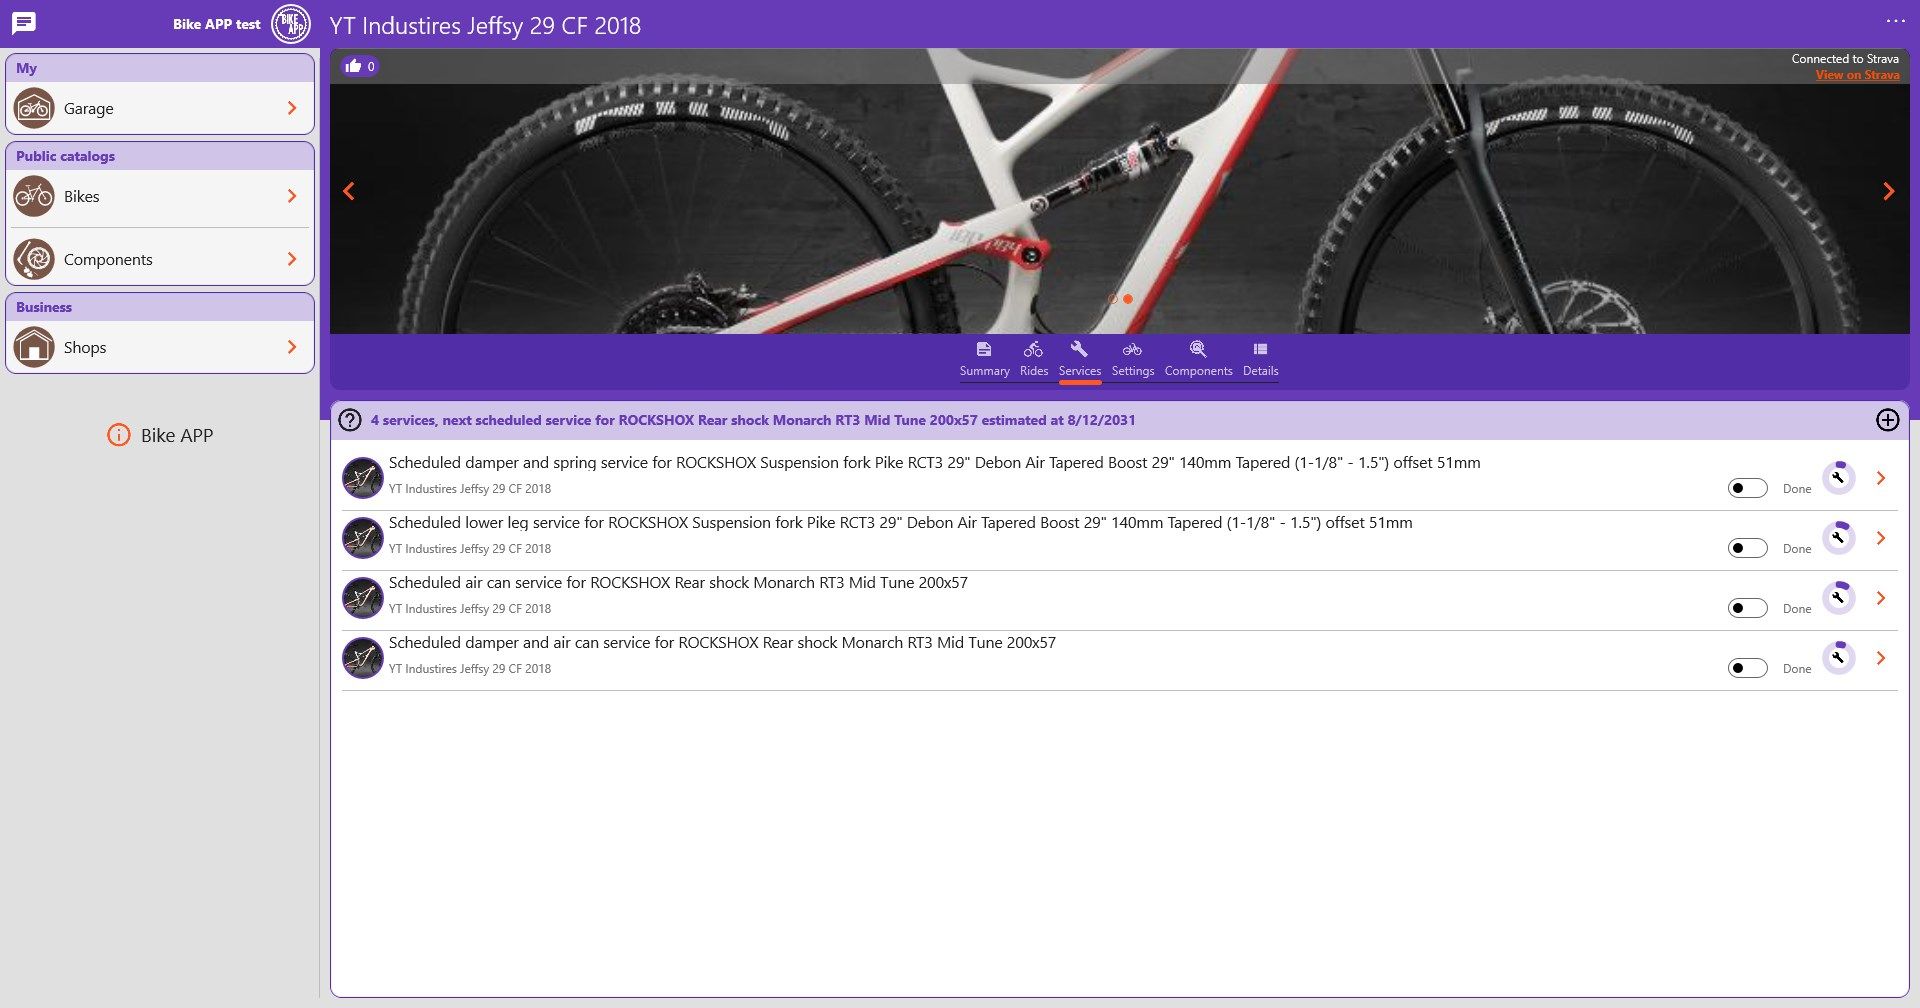 This is your digital bike garage and it's available everywhere with any device you have.

My garage shows an overview of your most important bike garage items like bikes, next services, rides and latest settings. You can also see your component inventory of items not attached to any bike, like spare chains.